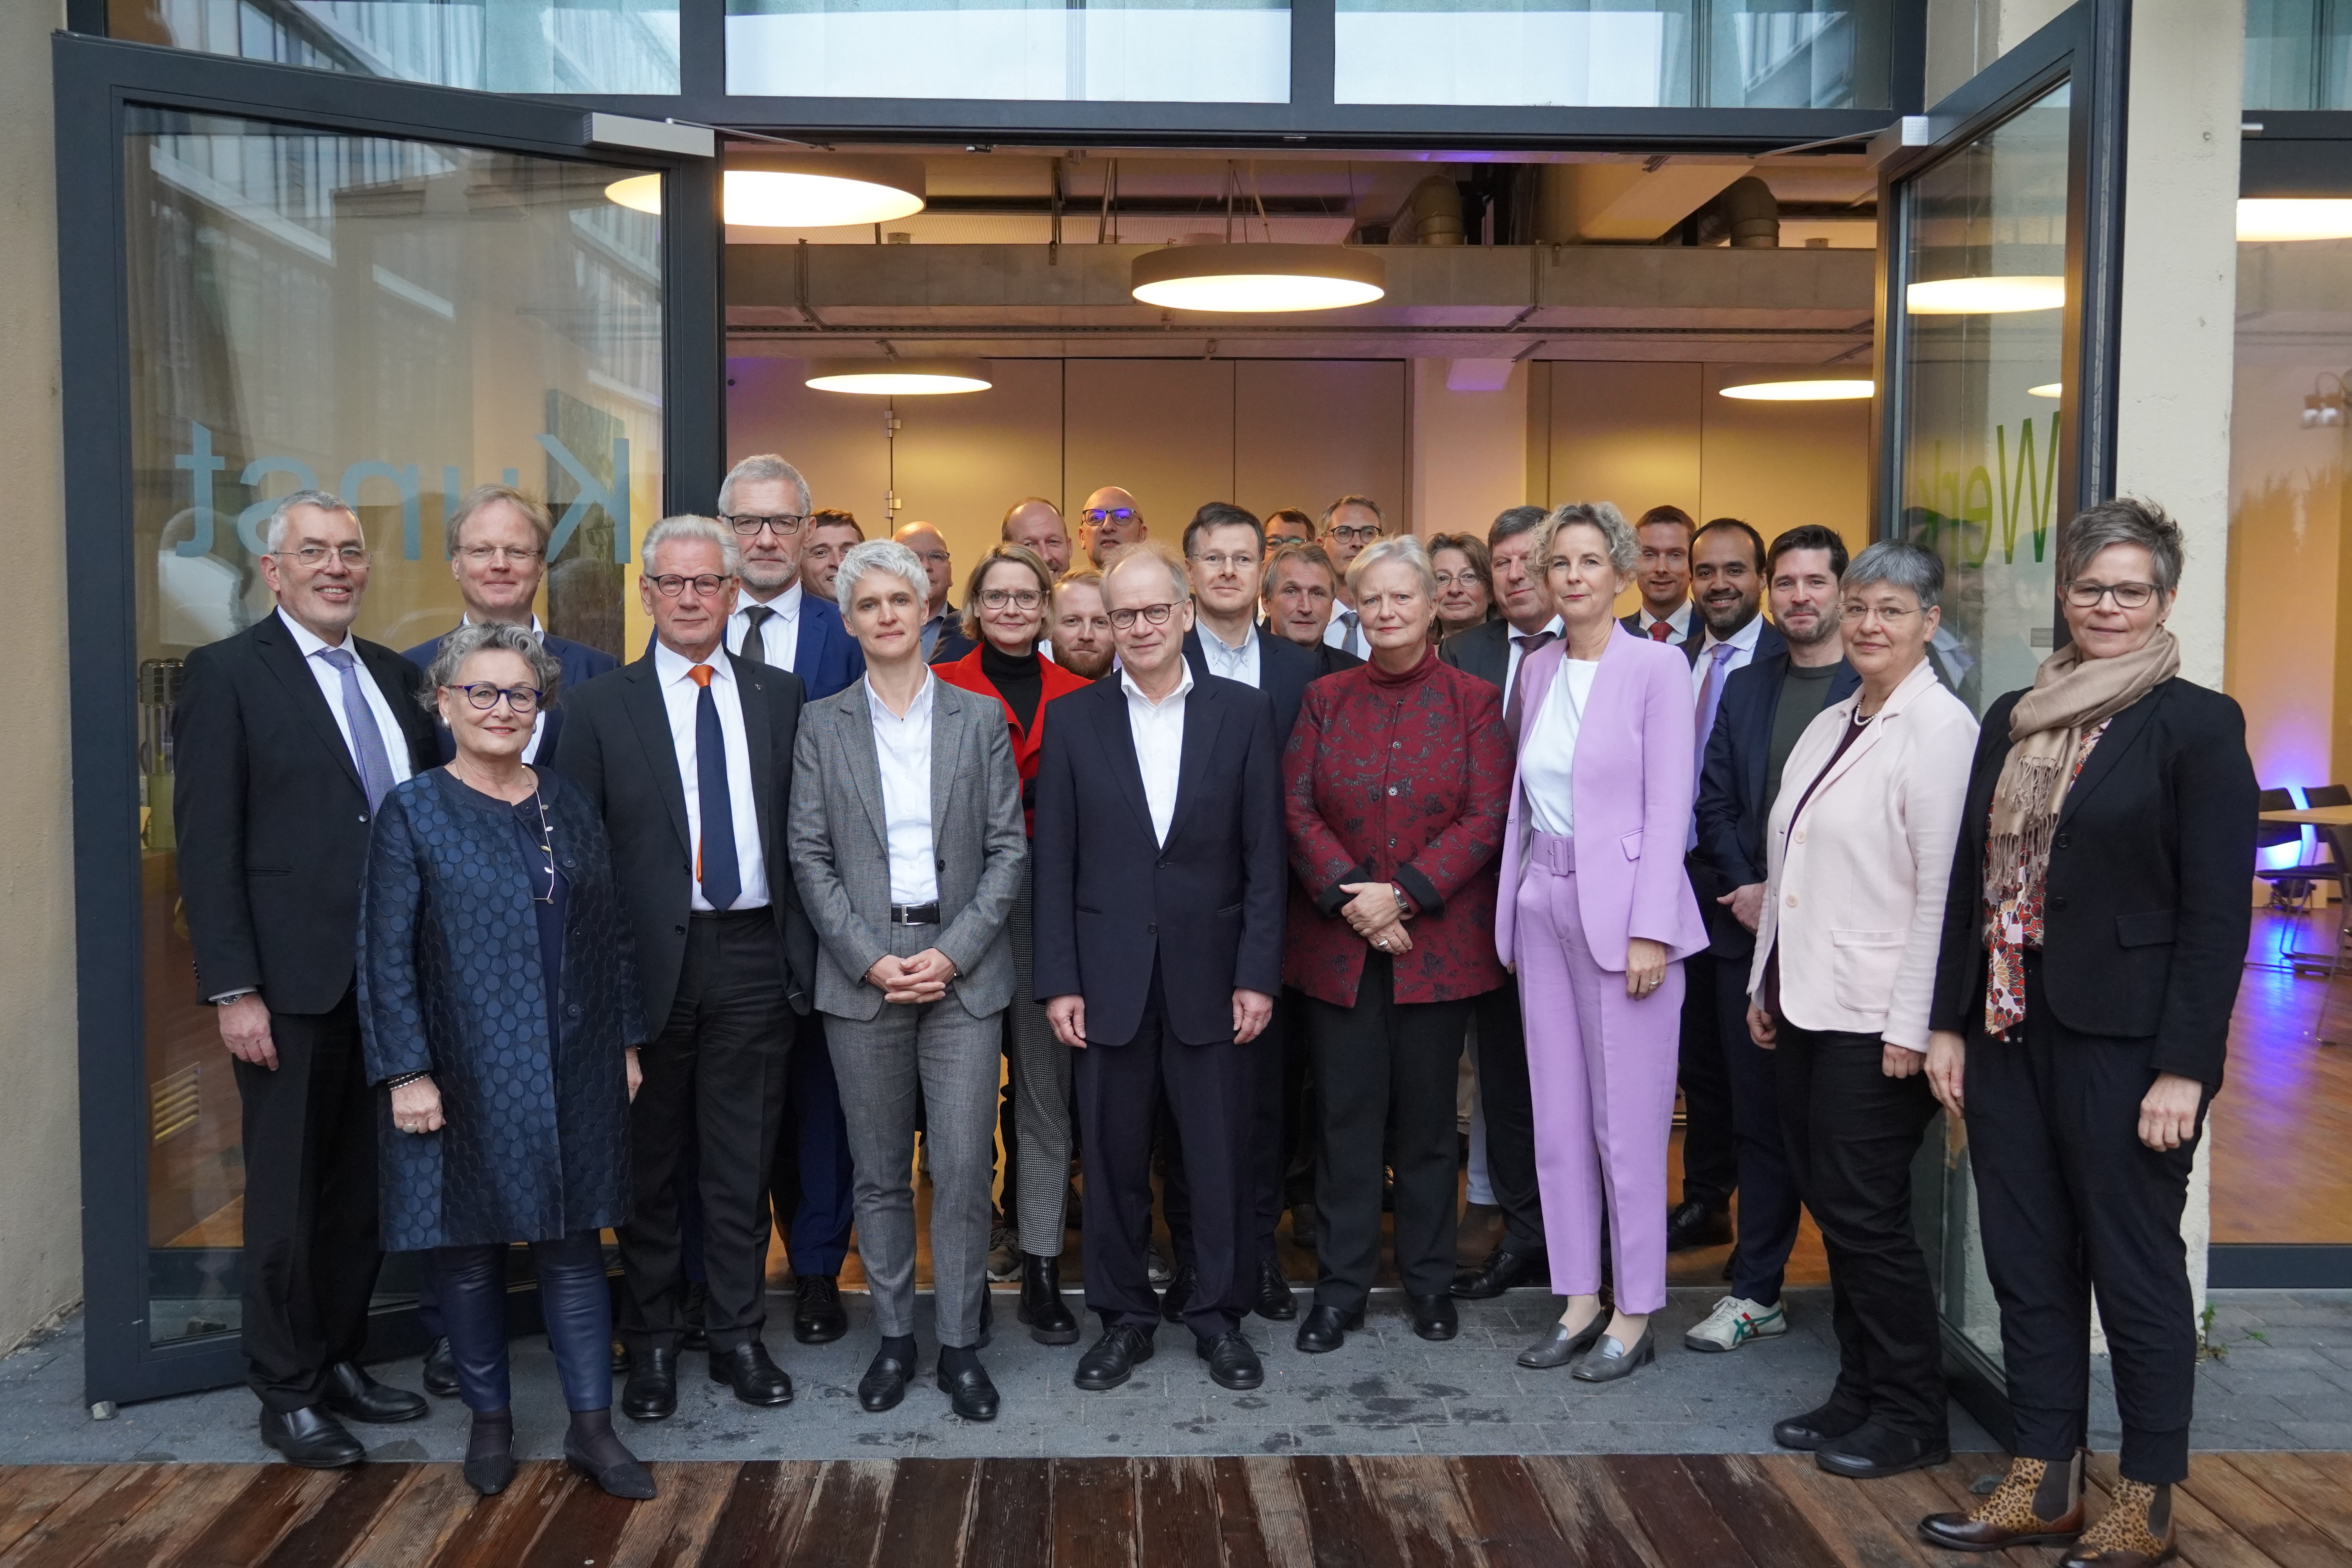 The Fraunhofer ISI Board of Trustees together with the Institute’s management and staff.